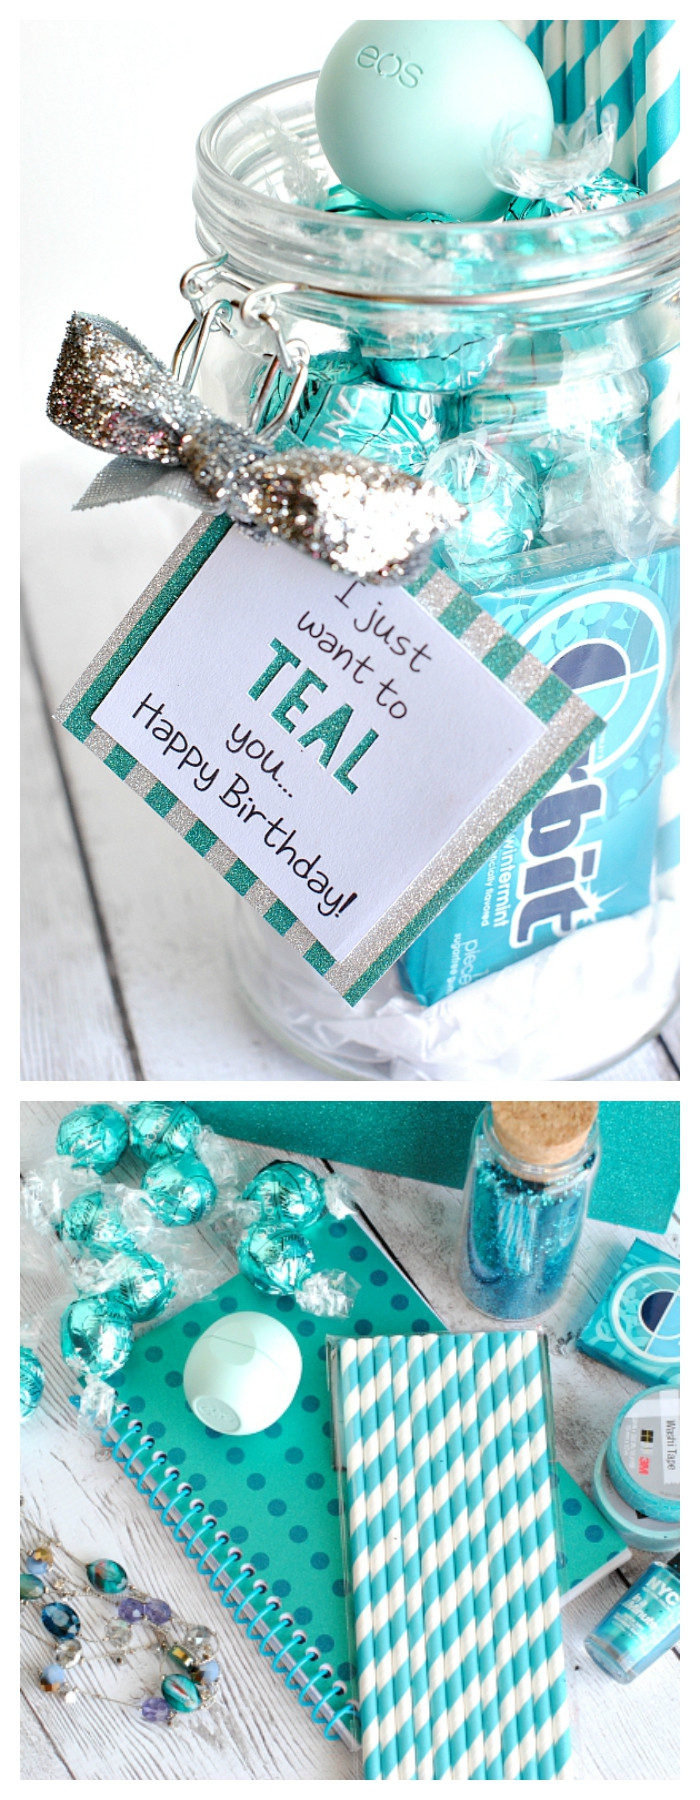 Happy Birthday Gift Ideas
 I Just Want to TEAL You Gift Idea for Friend Crazy